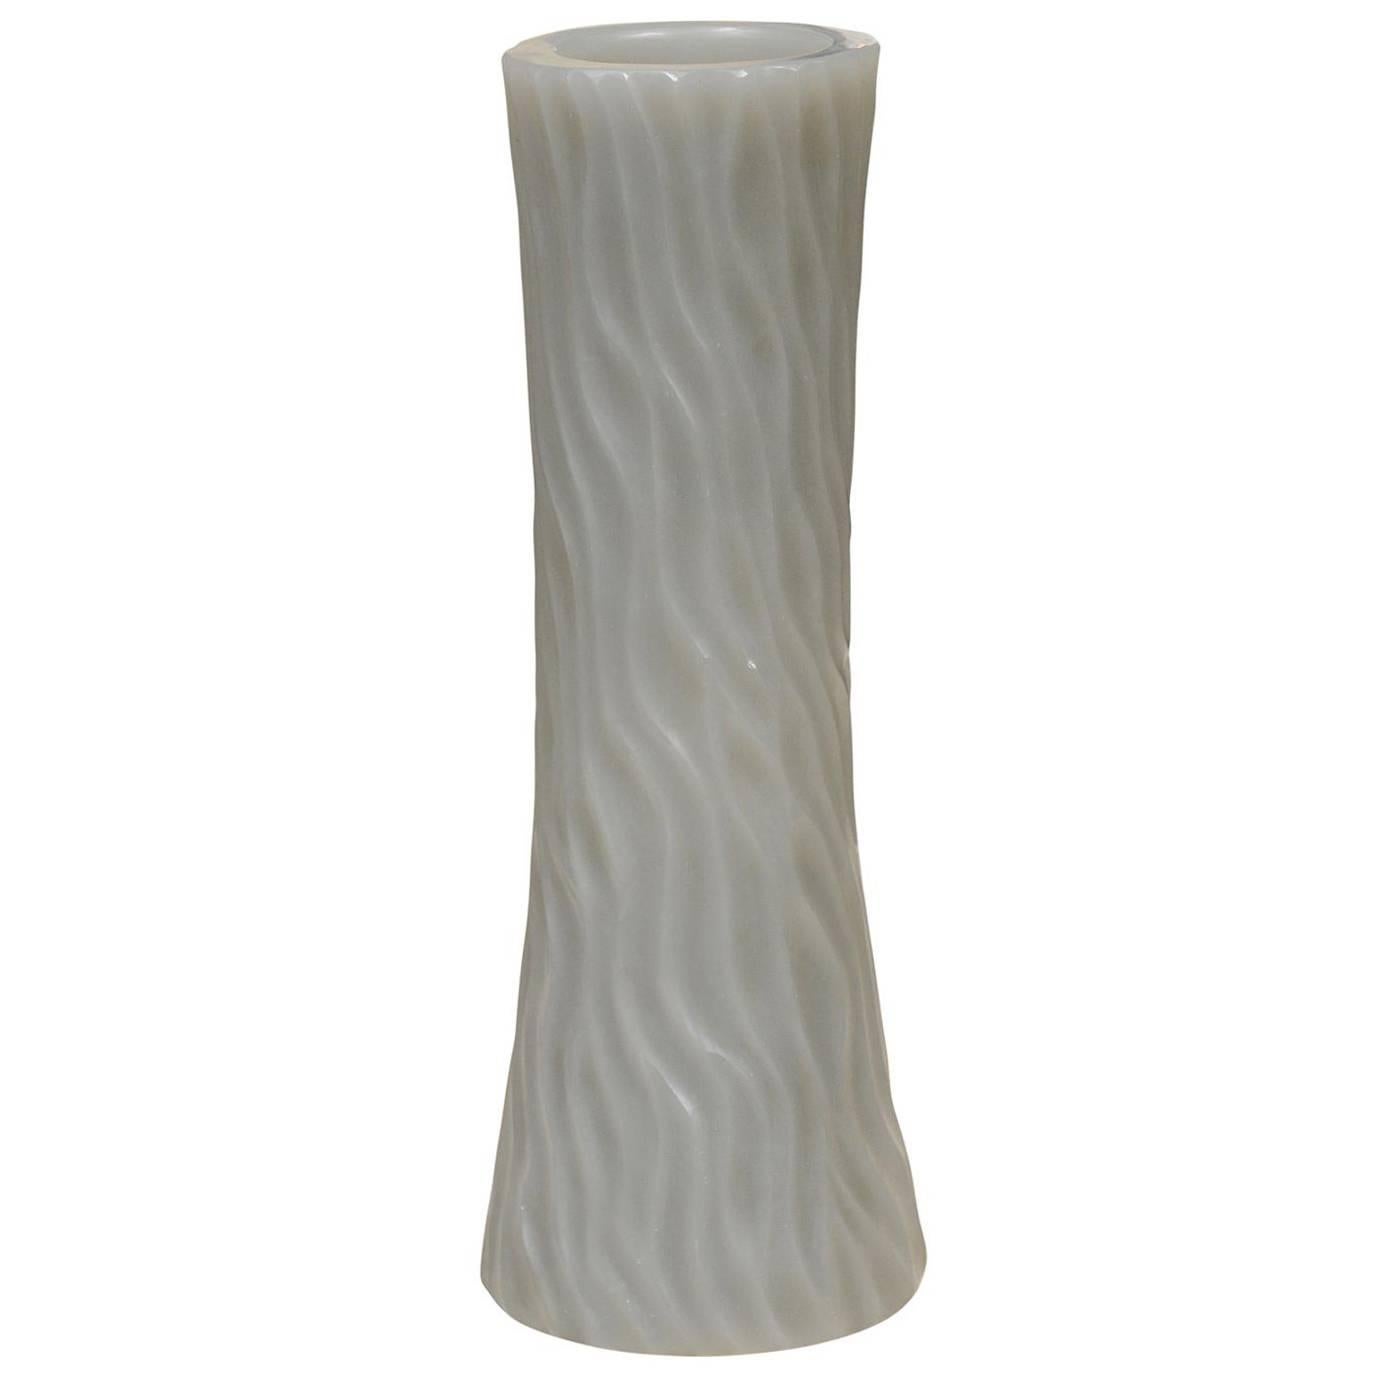 Robert Kuo Grey Cylindrical Carved Wave Design Vase For Sale